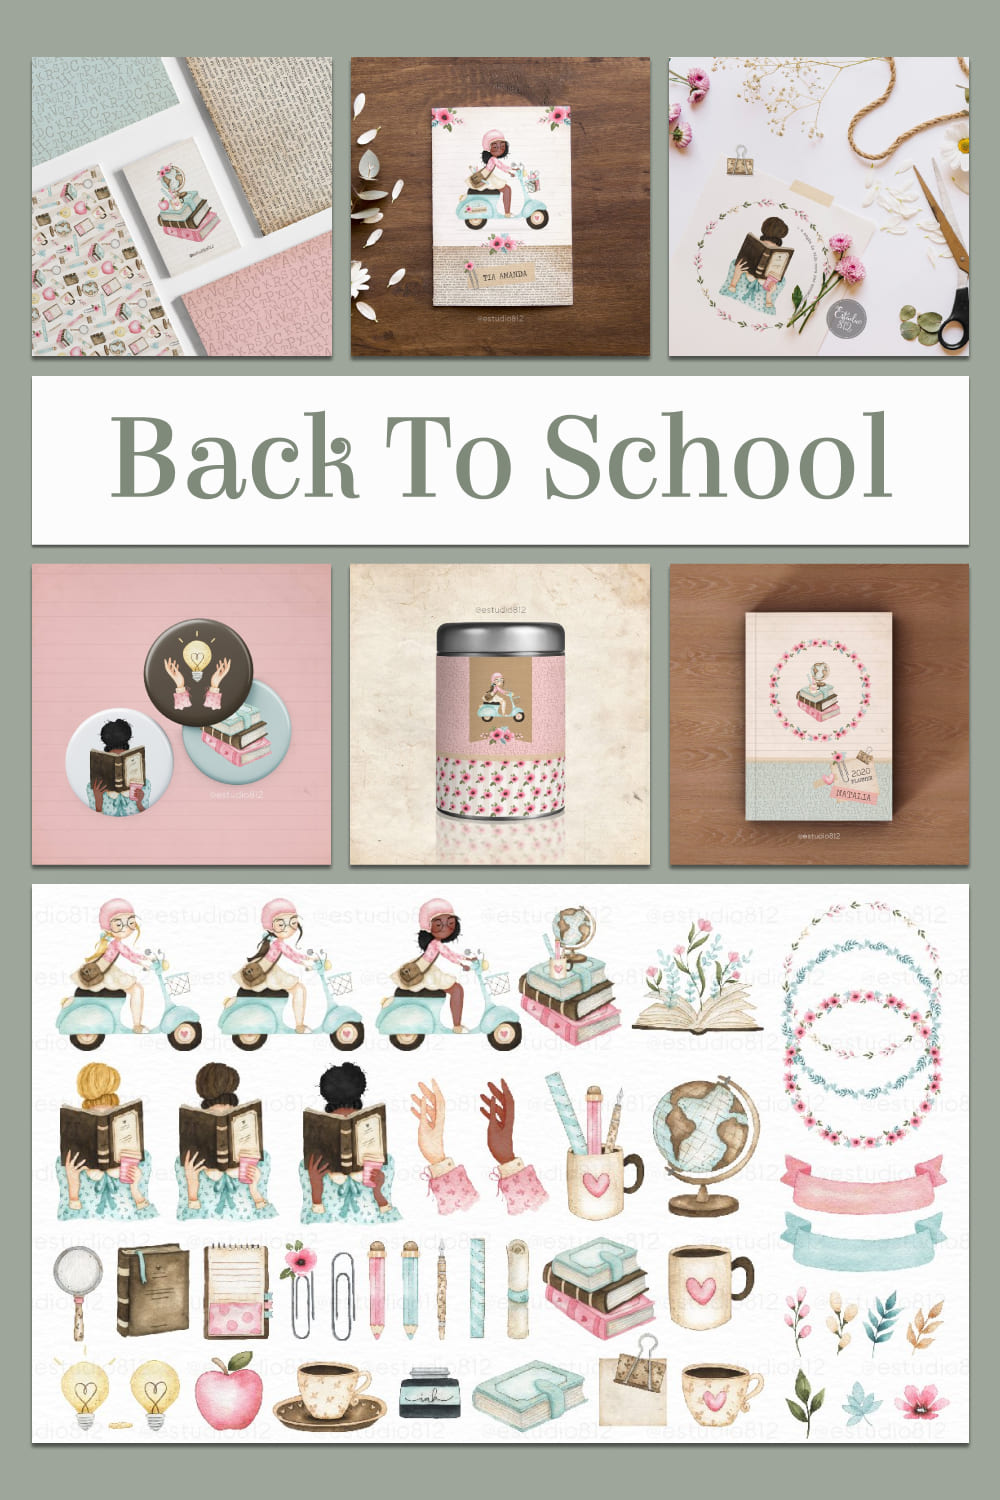 Back to school - pinterest image preview.